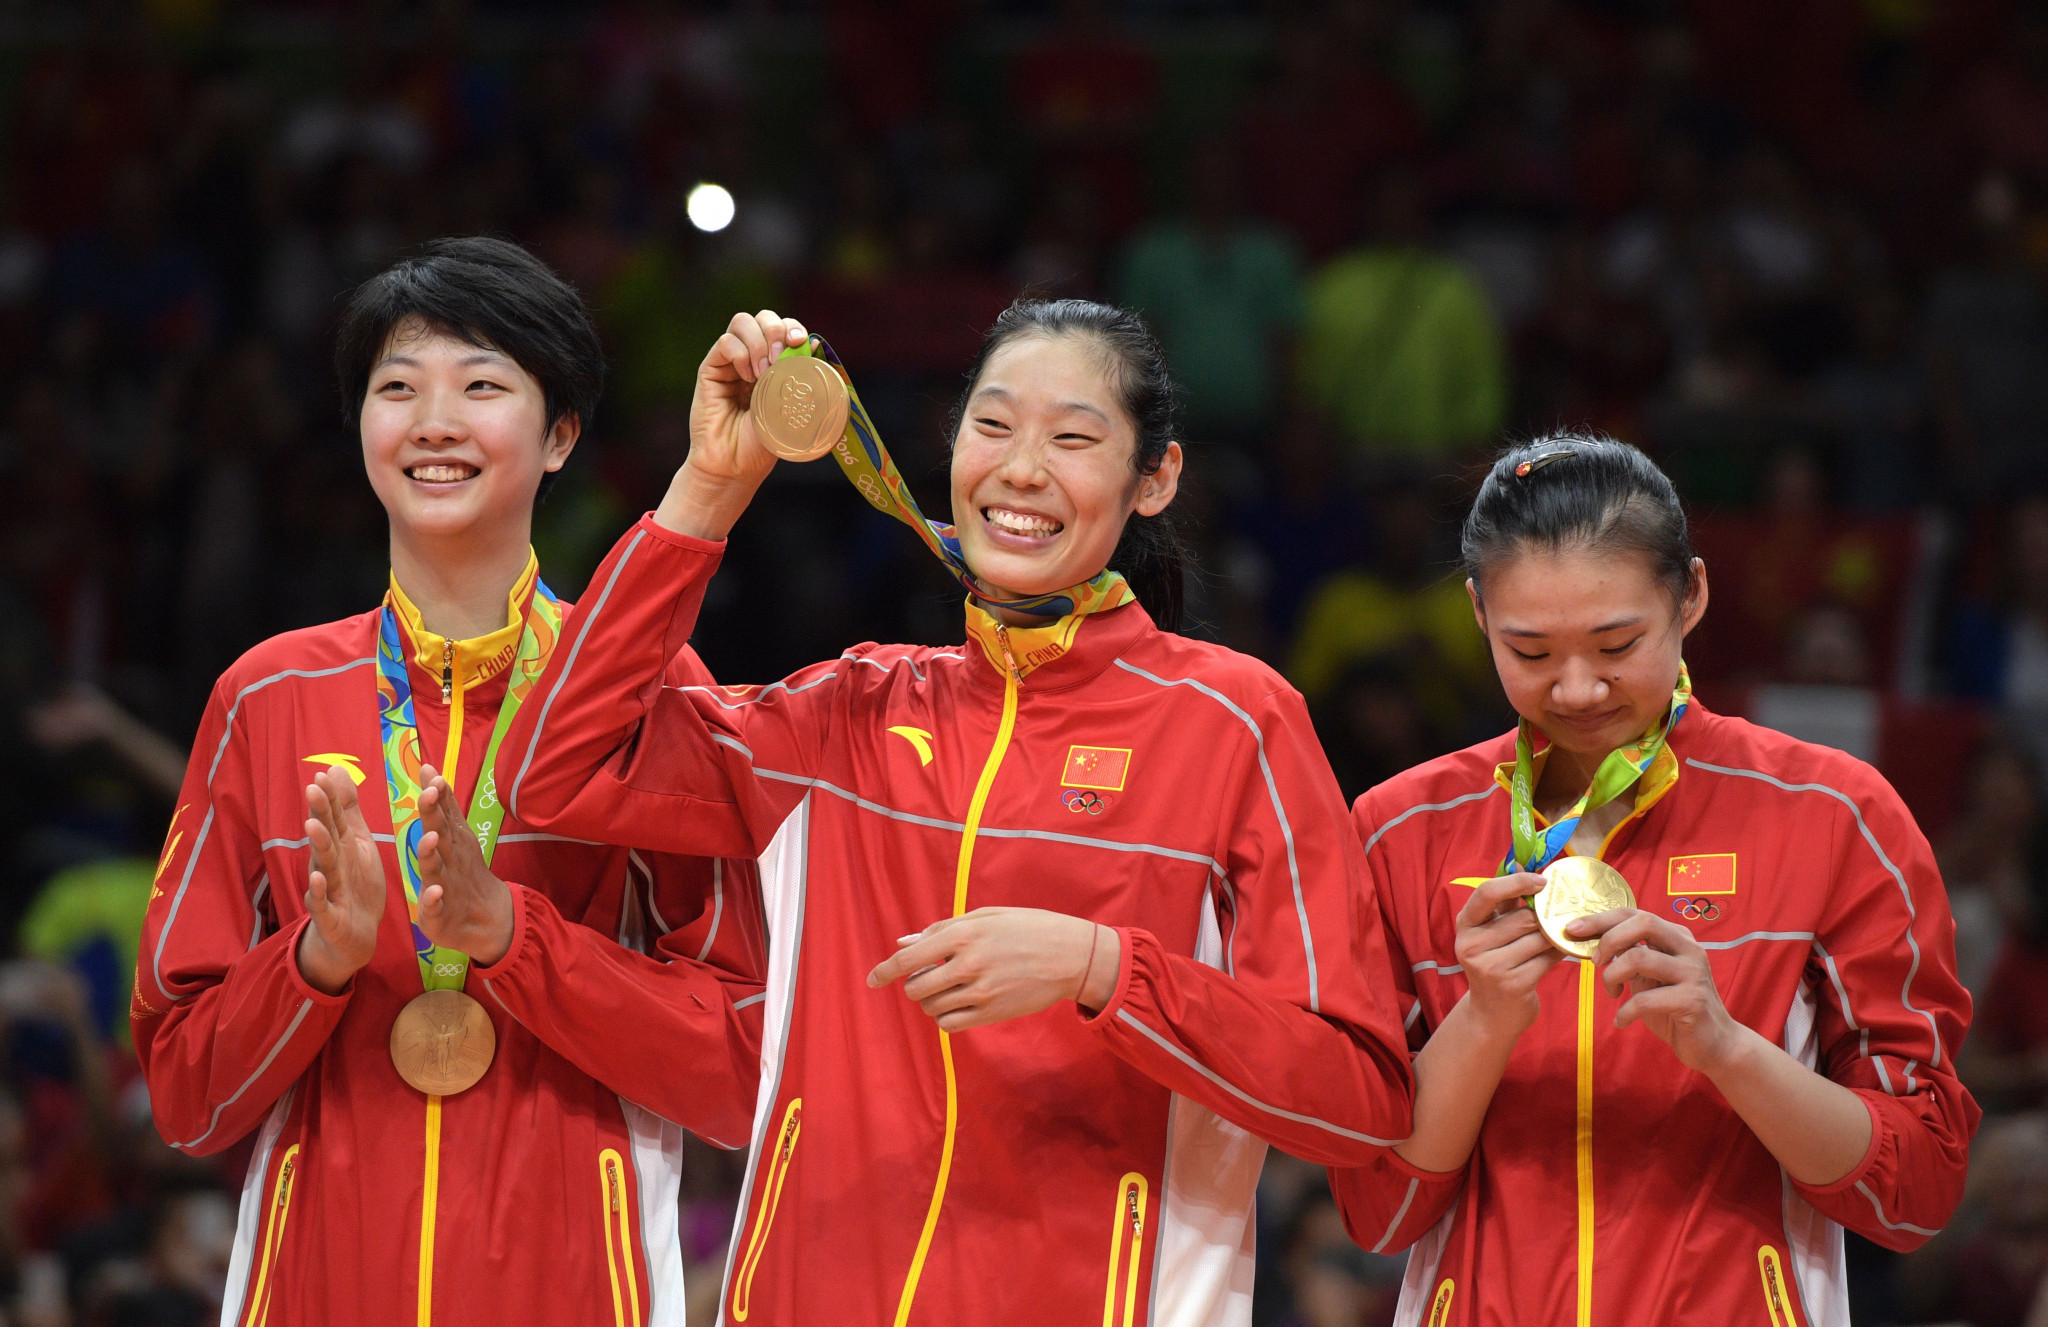 Yang Fangxu was a member of the Chinese team which won the gold medal at Rio 2016 ©Getty Images